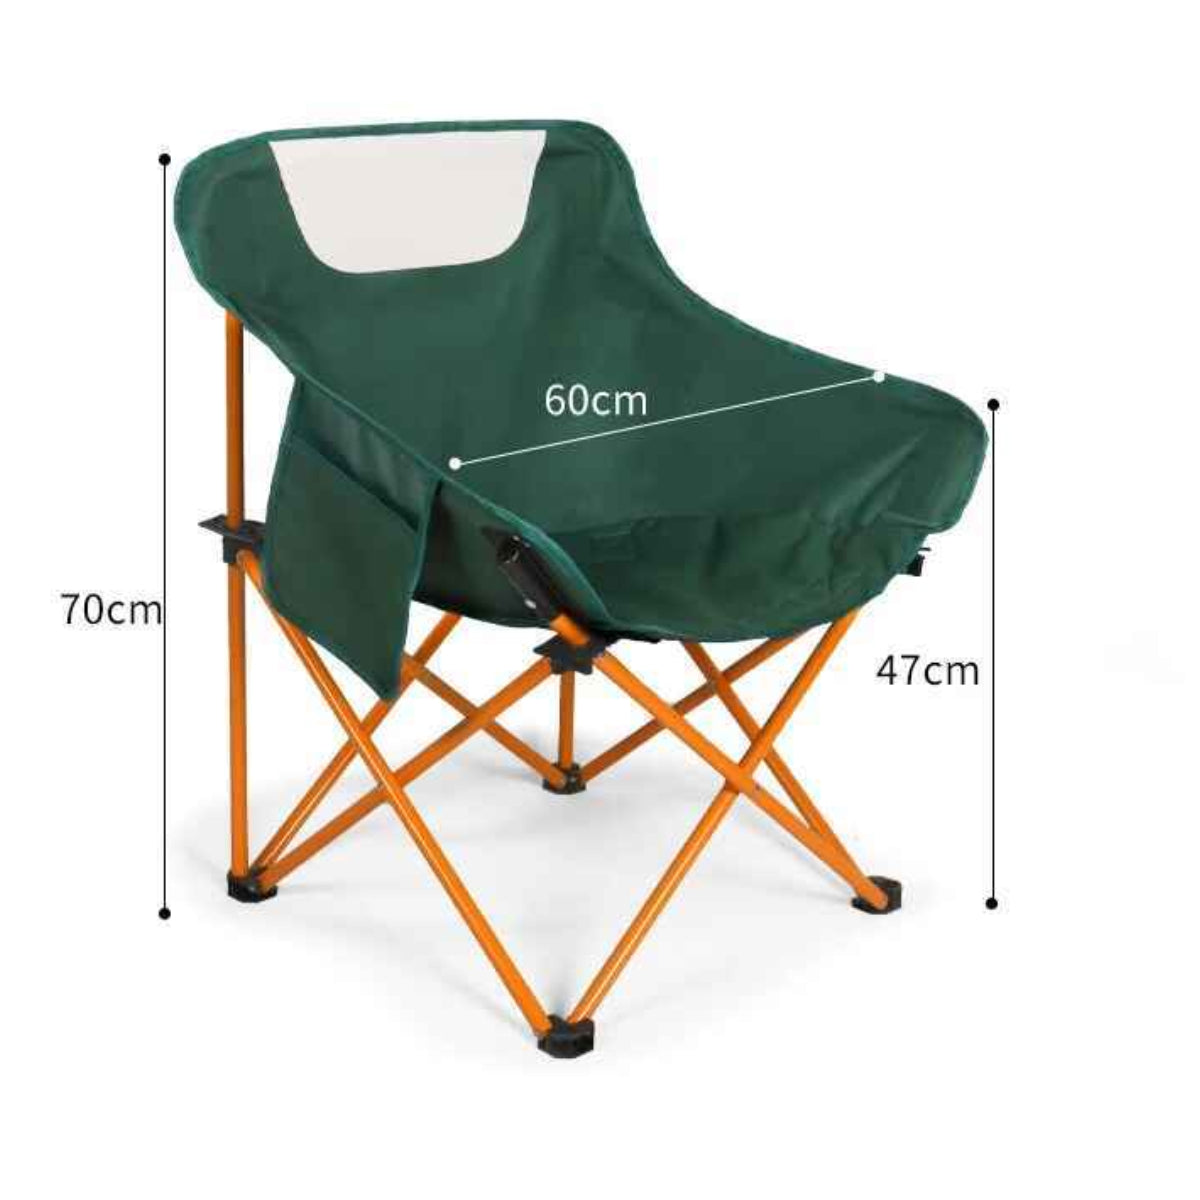 Lightweight Outdoor Folding Chairs: Perfect for Camping & More